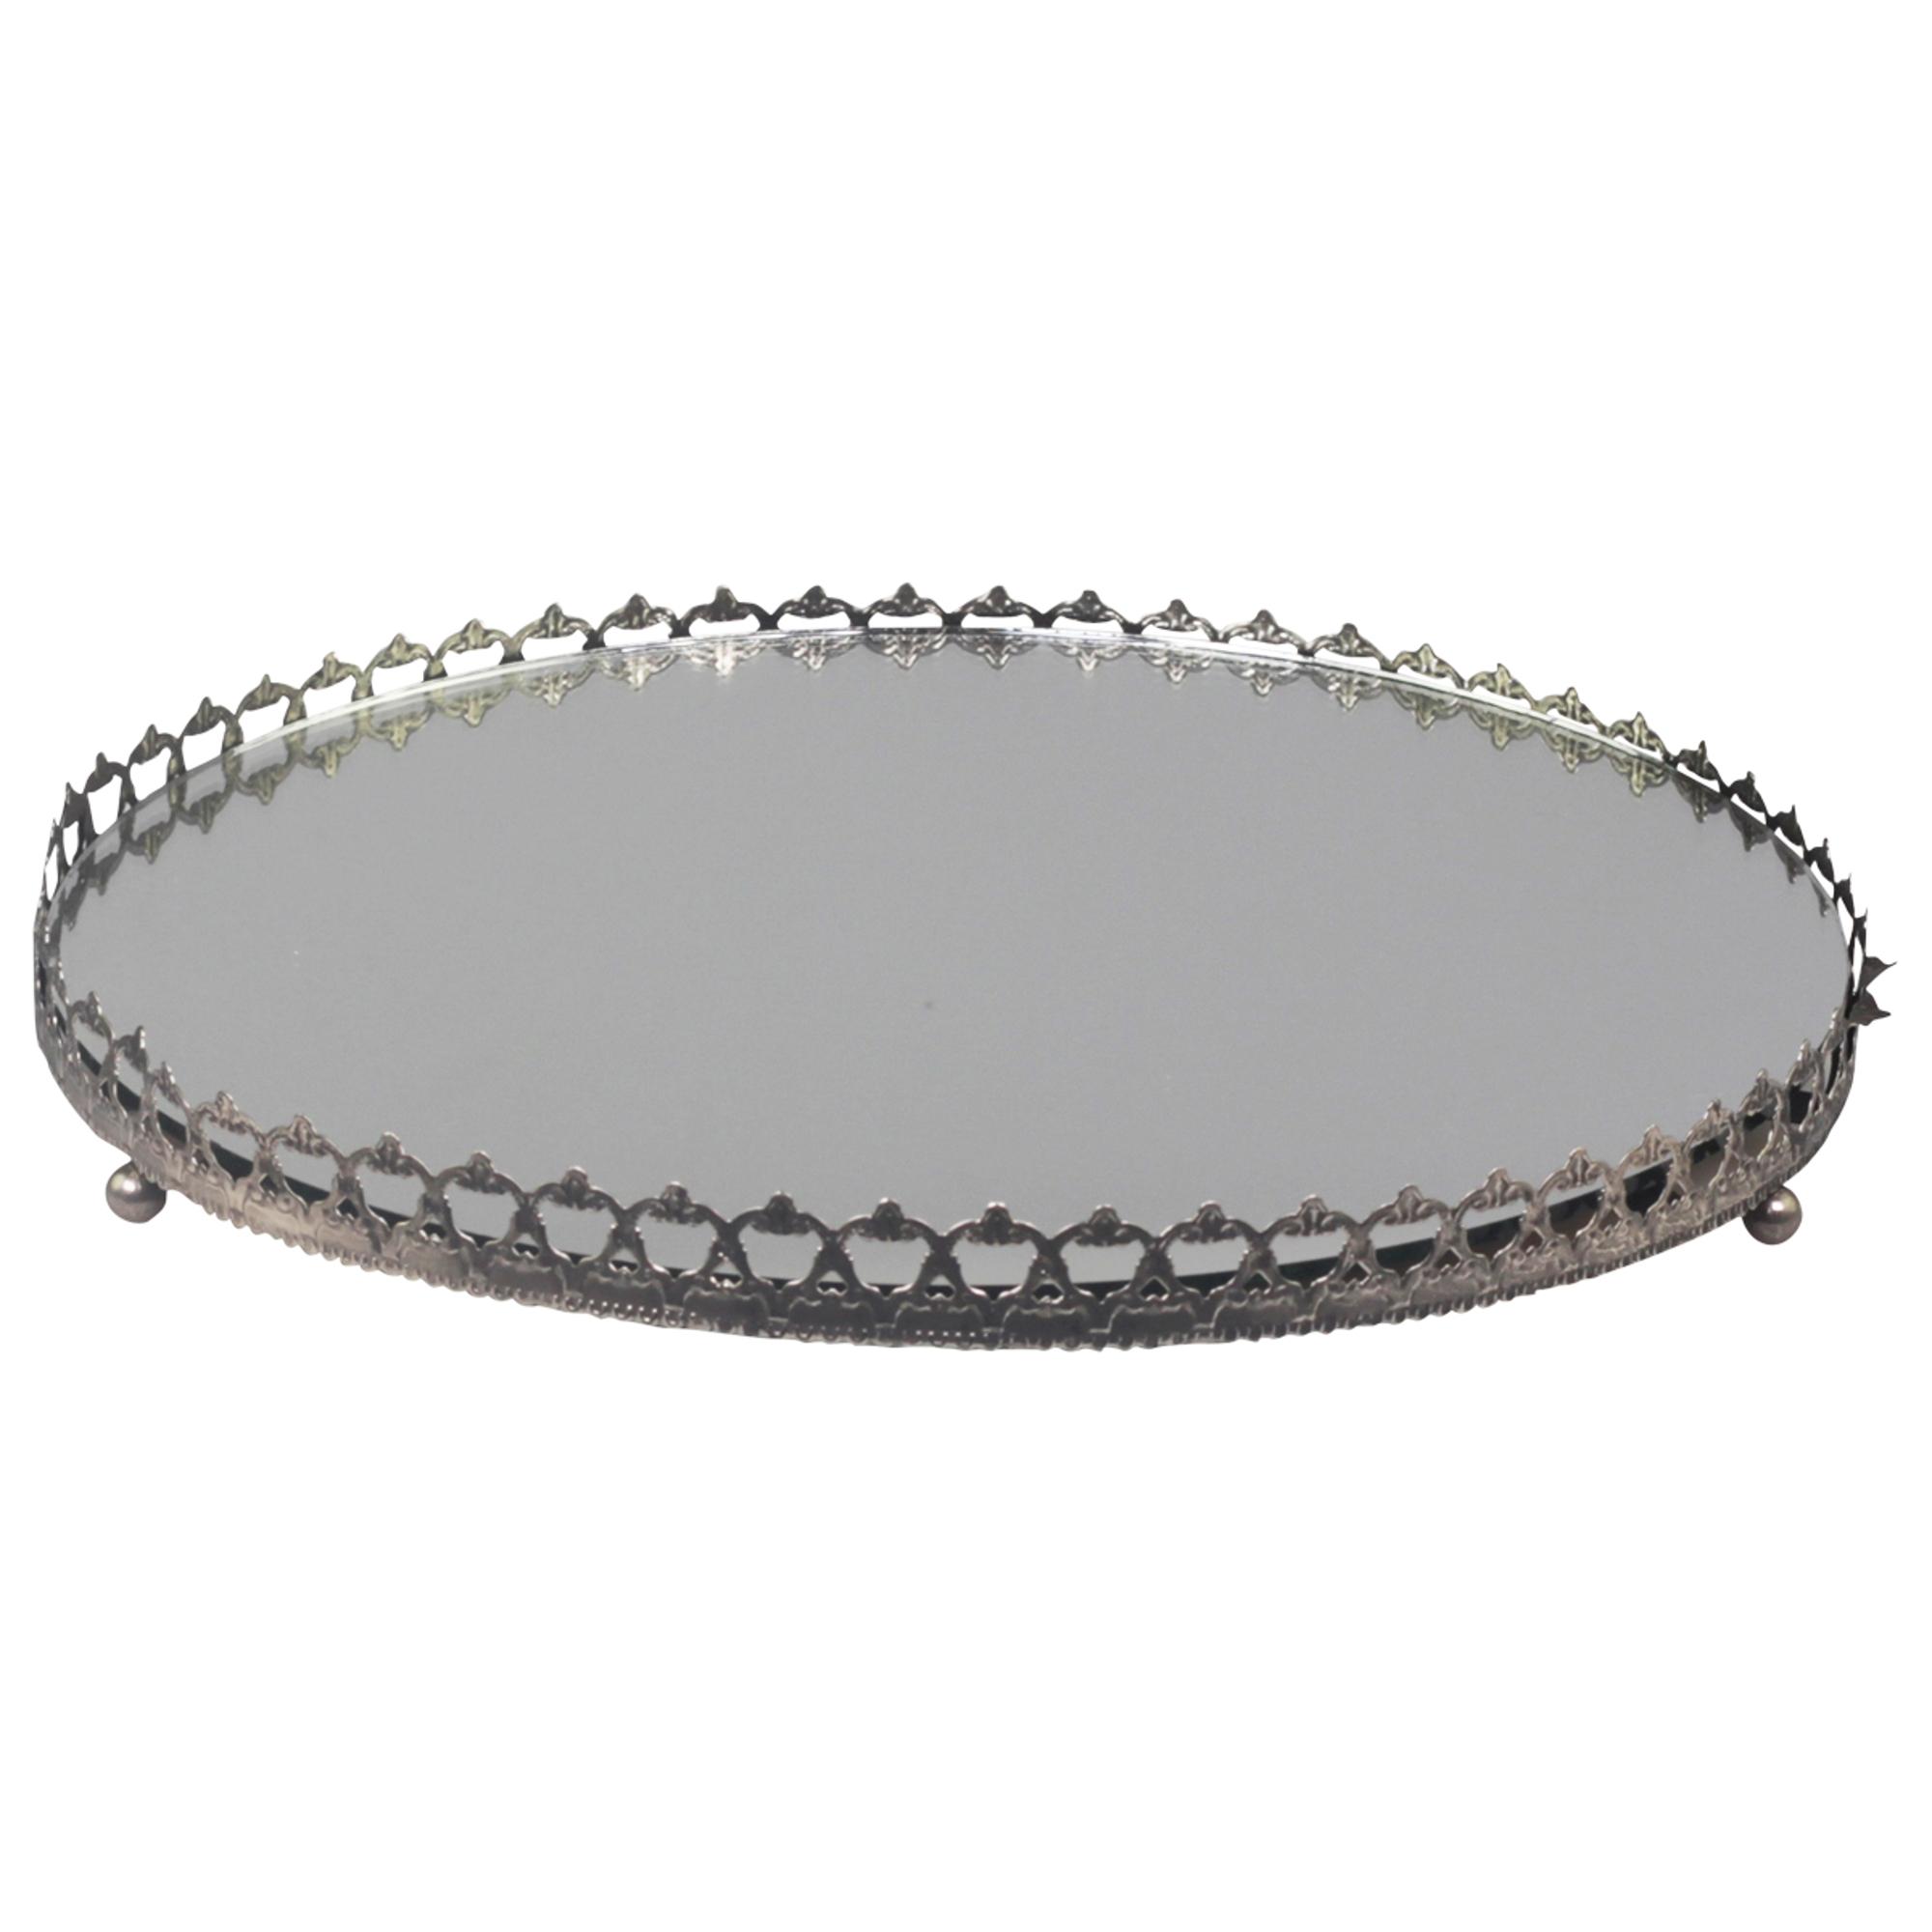 Chic Antique Mirror Dish with Lace Border